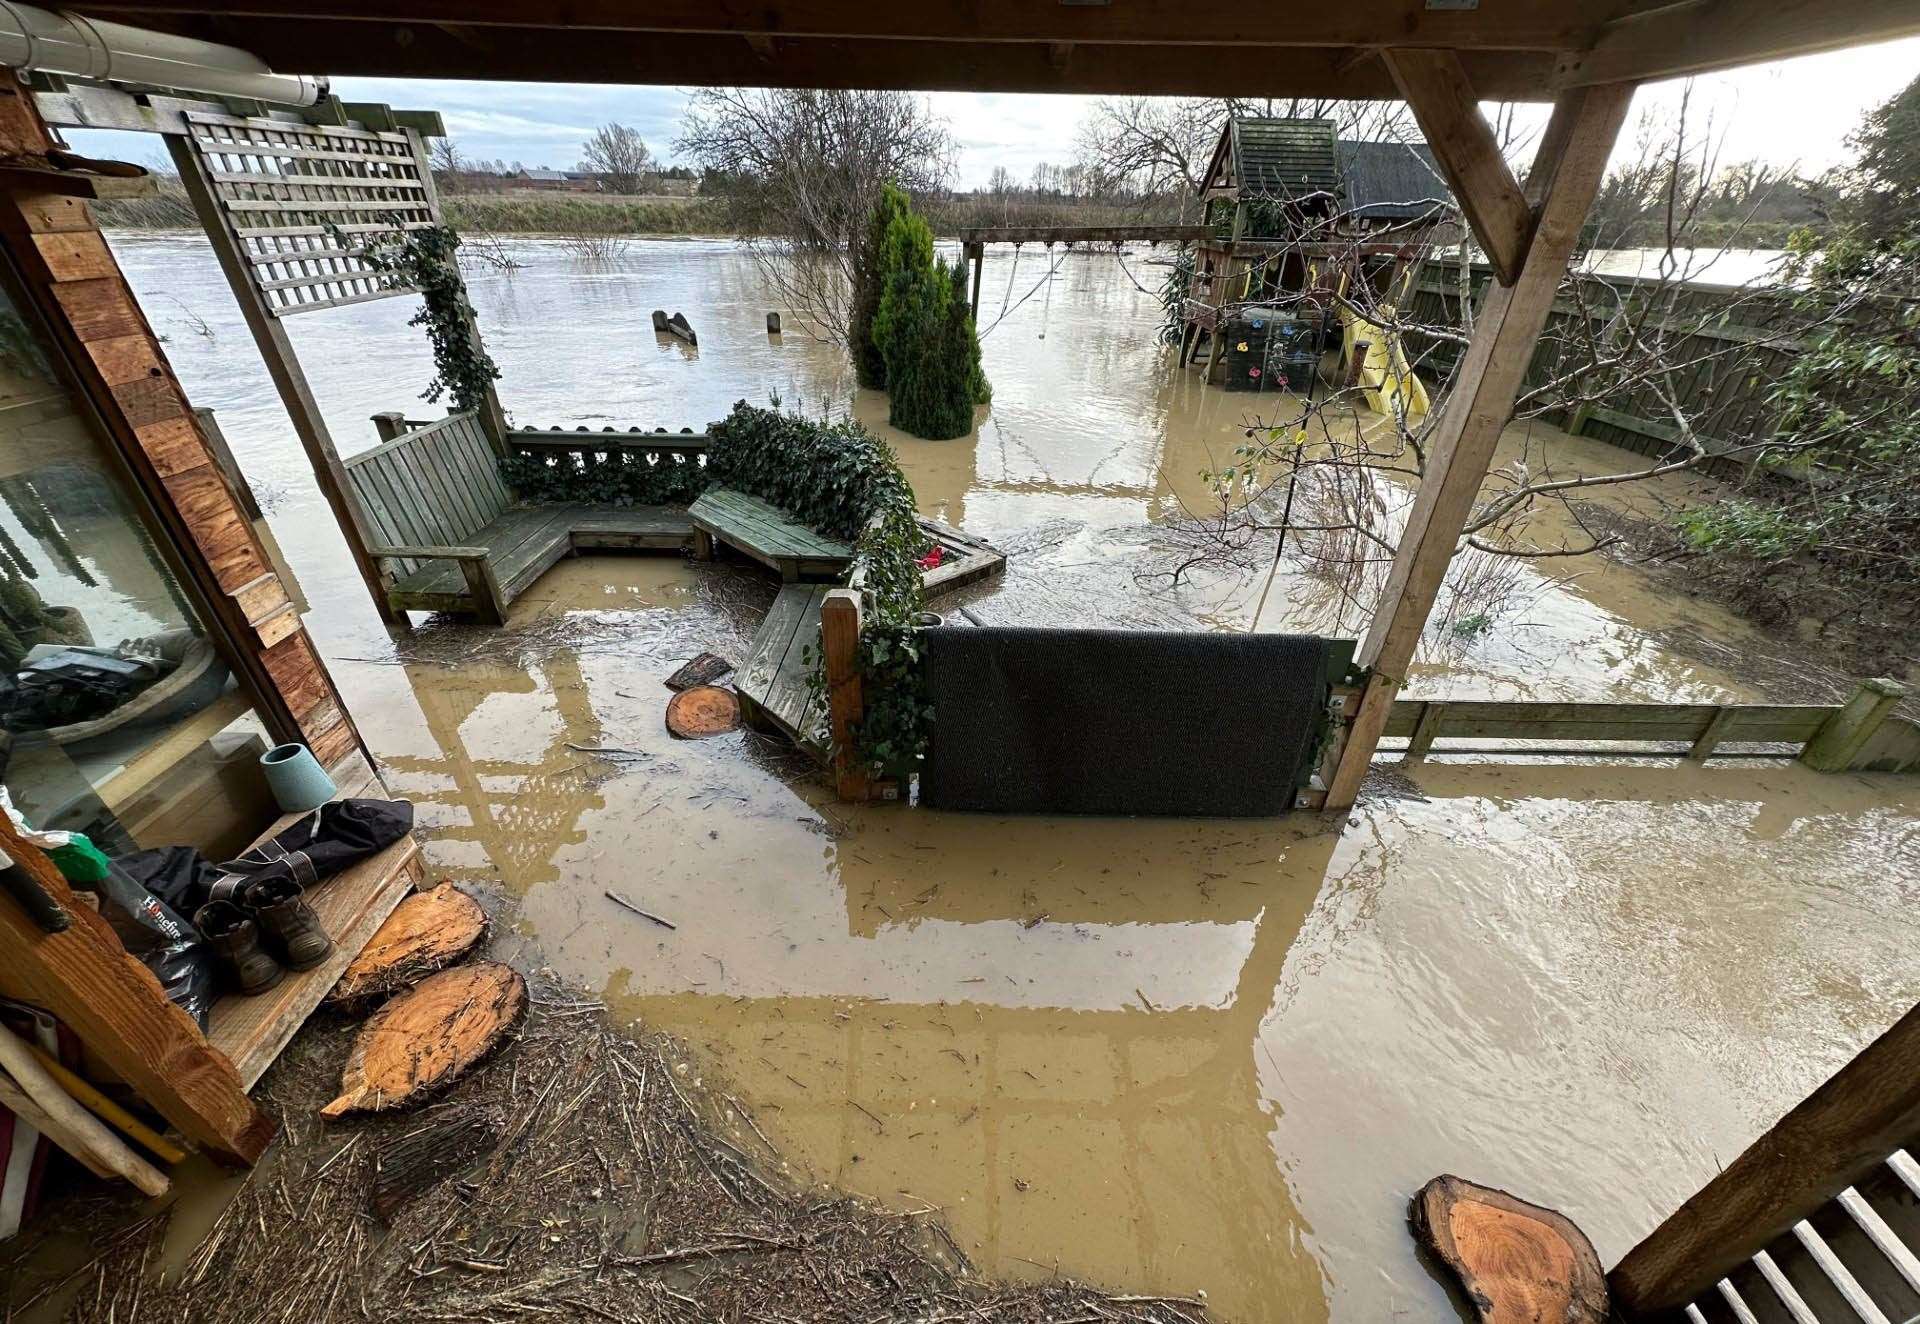 Flood water left everything drenched before receding and breaking the cap off the borehole, which supplies water to the whole site and Mr Walters’ home nearby (David Walters/PA)